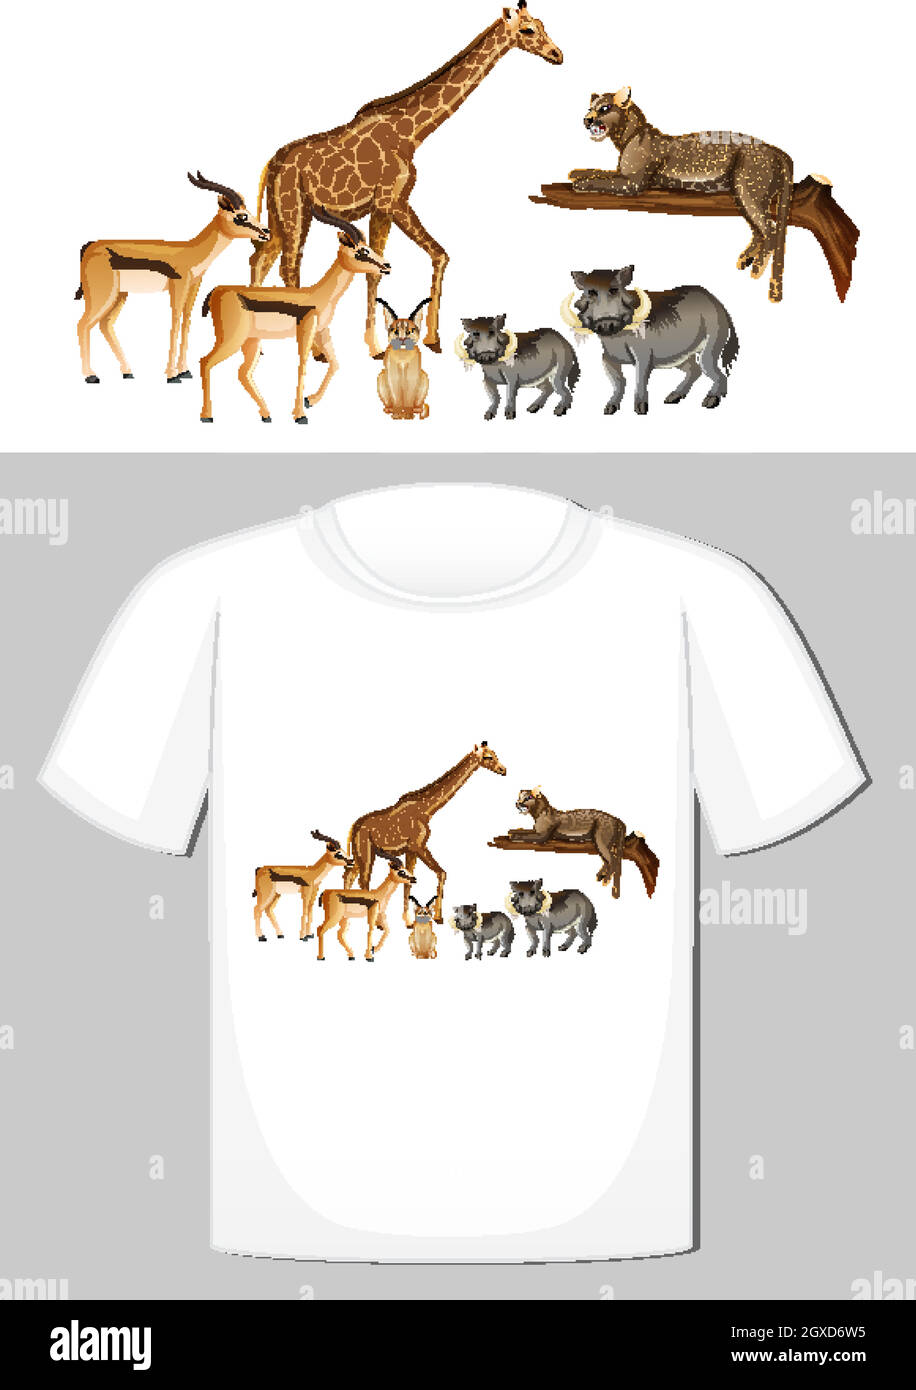 Group of wild animals design for t-shirt Stock Vector